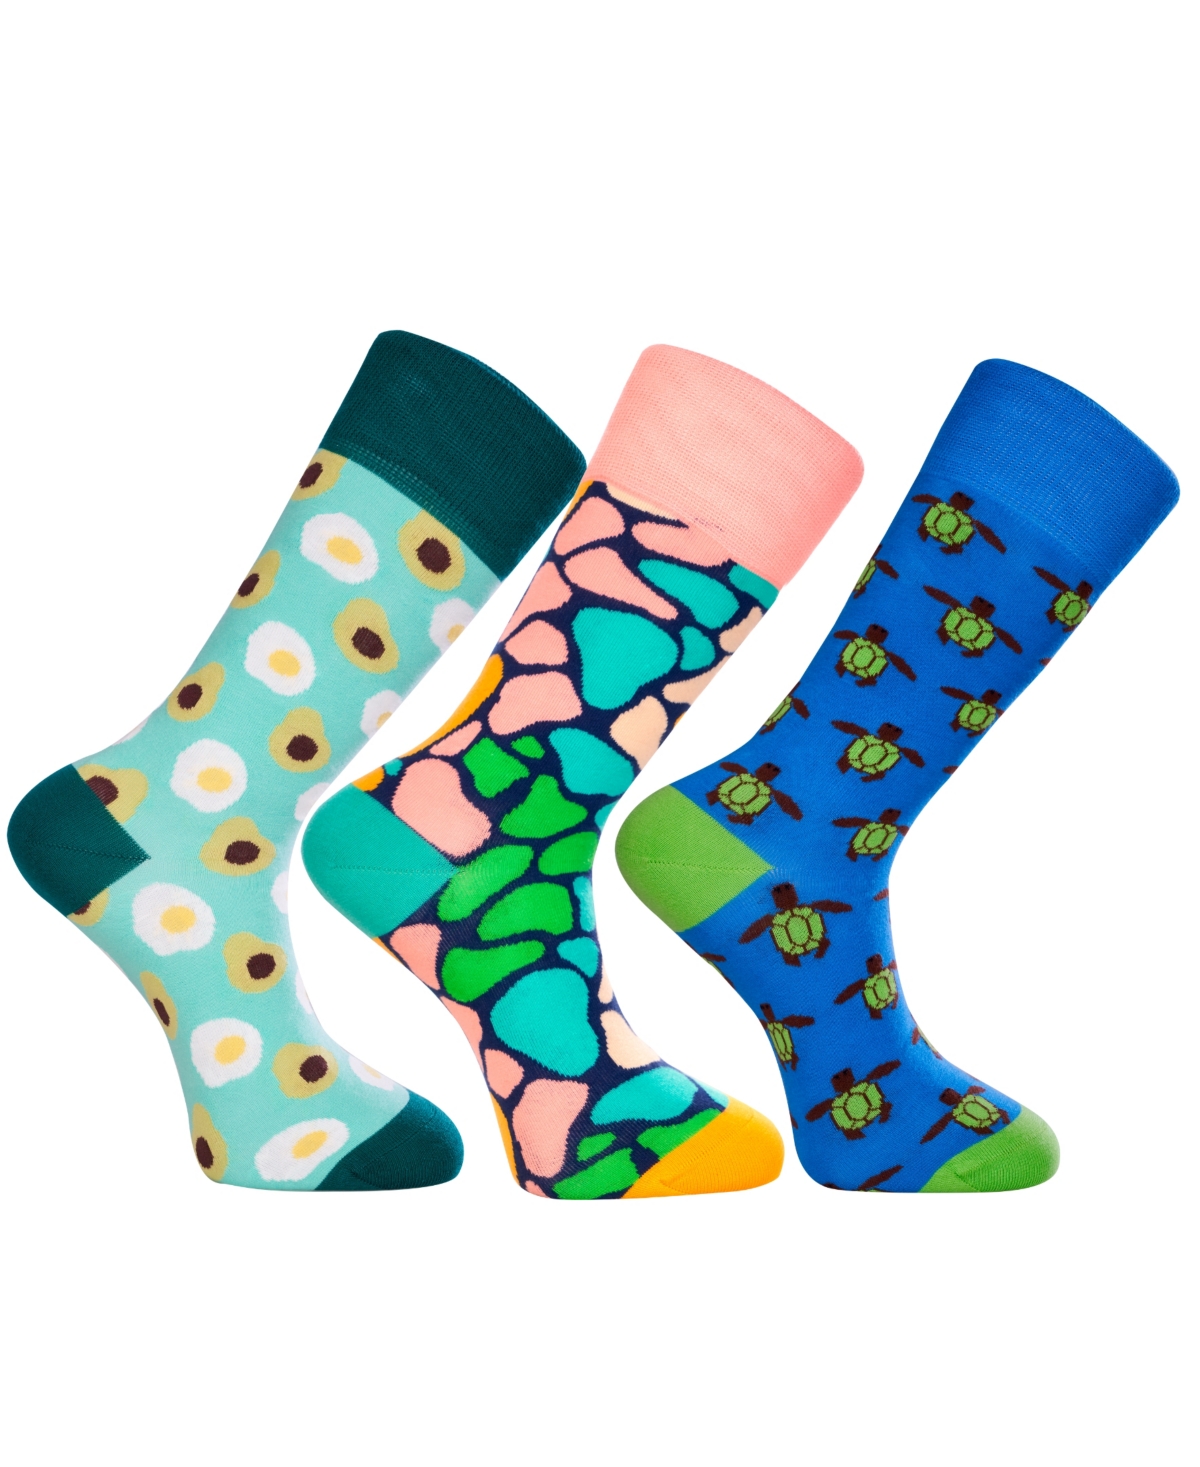 Love Sock Company Men's Cancun Novelty Luxury Crew Socks Bundle Fun Colorful With Seamless Toe Design, Pack Of 3 In Multi Color